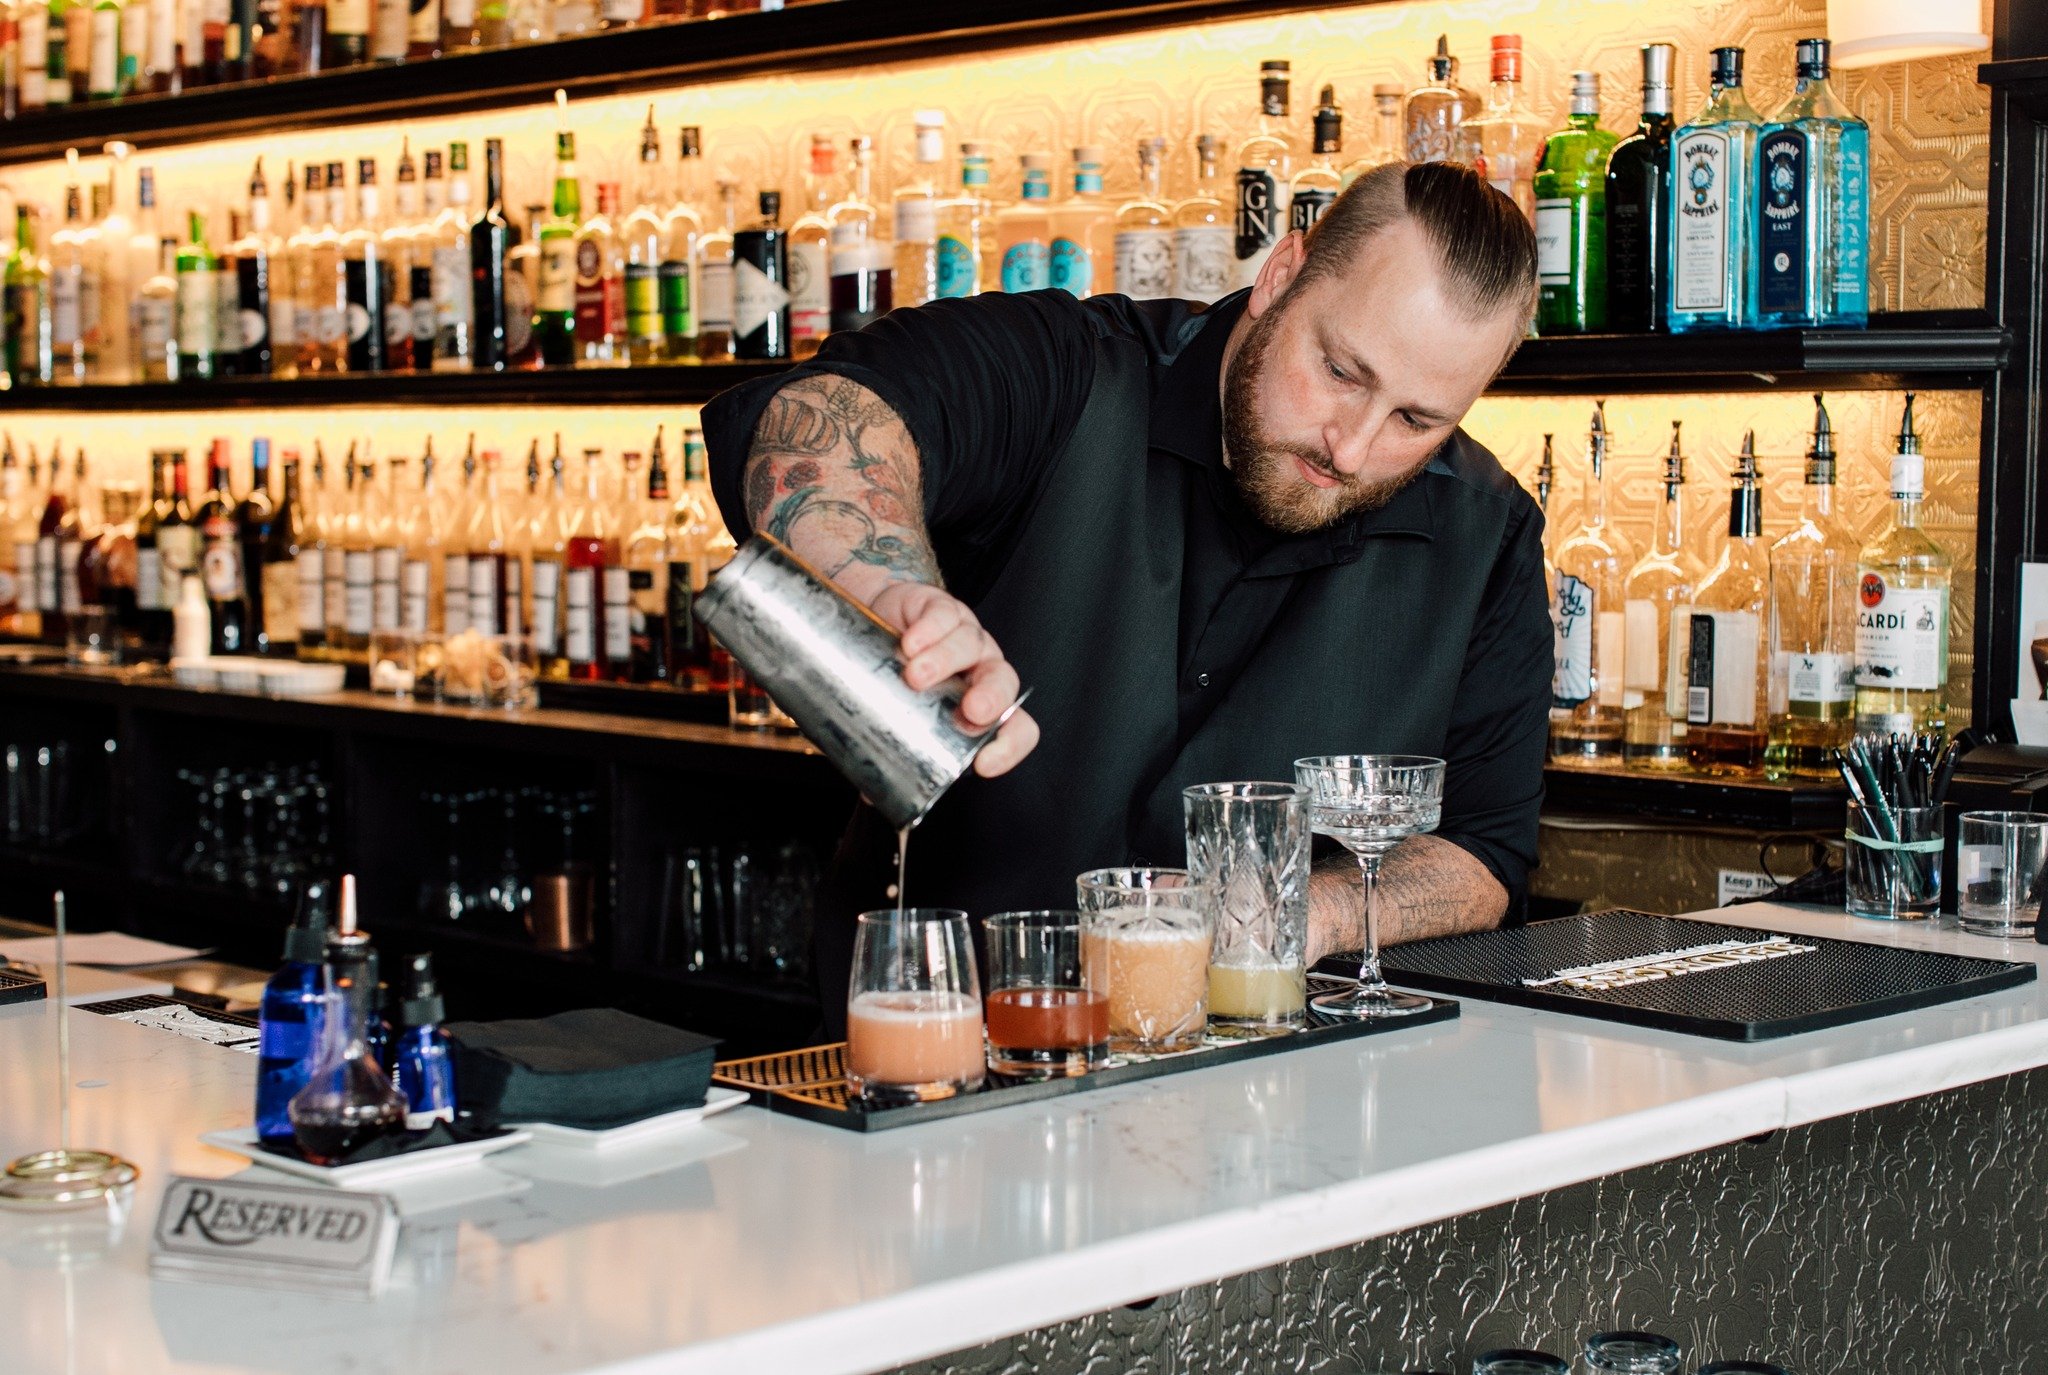 There's a reason why we're one of Bellingham's best! 🍹⭐️

Thanks to our incredible bartenders and creative concoctions, we are proud winners of the Bellingham Bartender Competition. 

Come visit us to experience the award-winning excellence of Belli